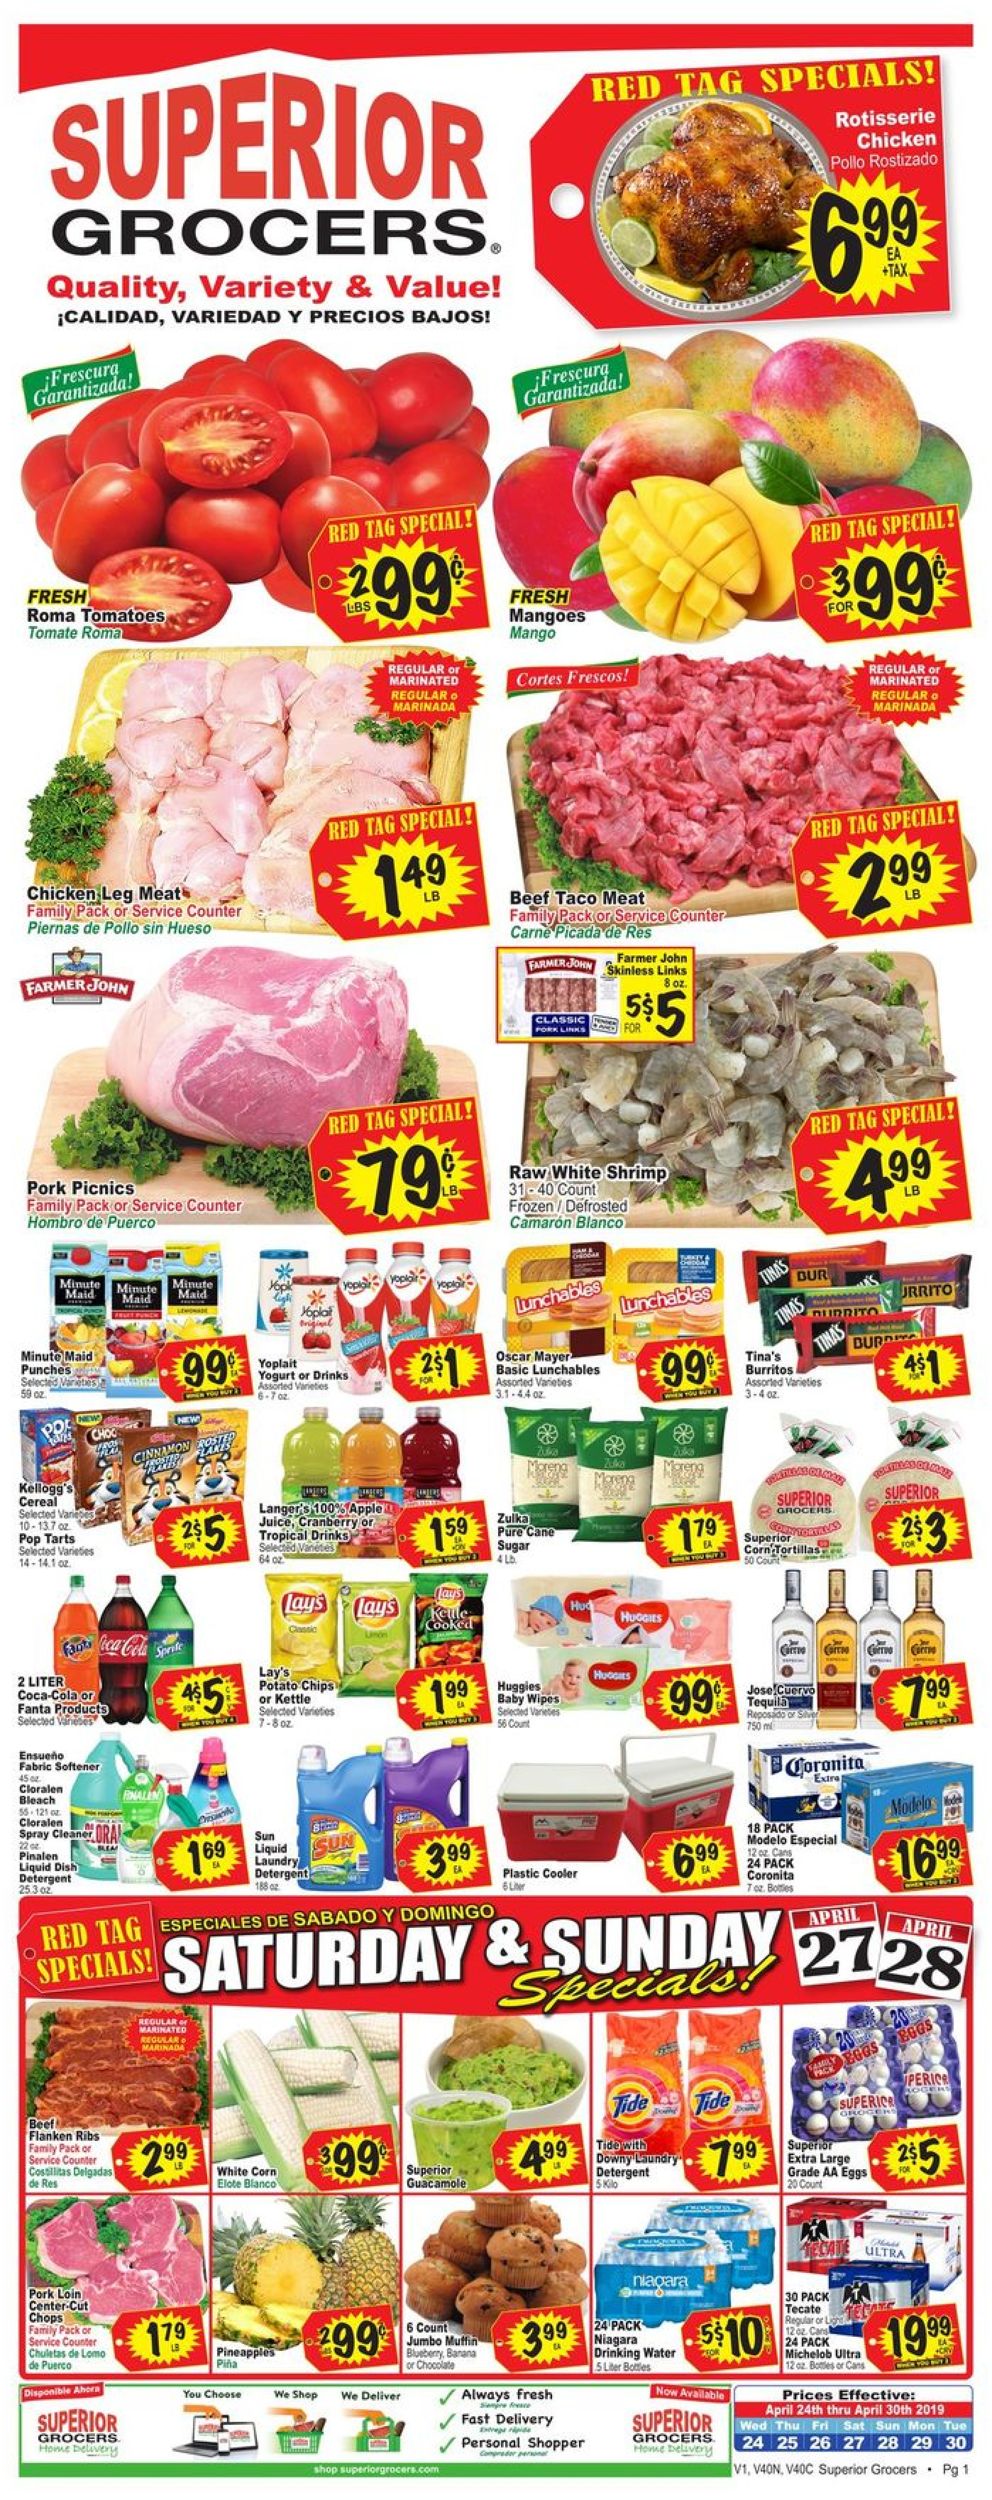 Superior Grocers Current weekly ad 04/24 - 04/30/2019 - frequent-ads.com